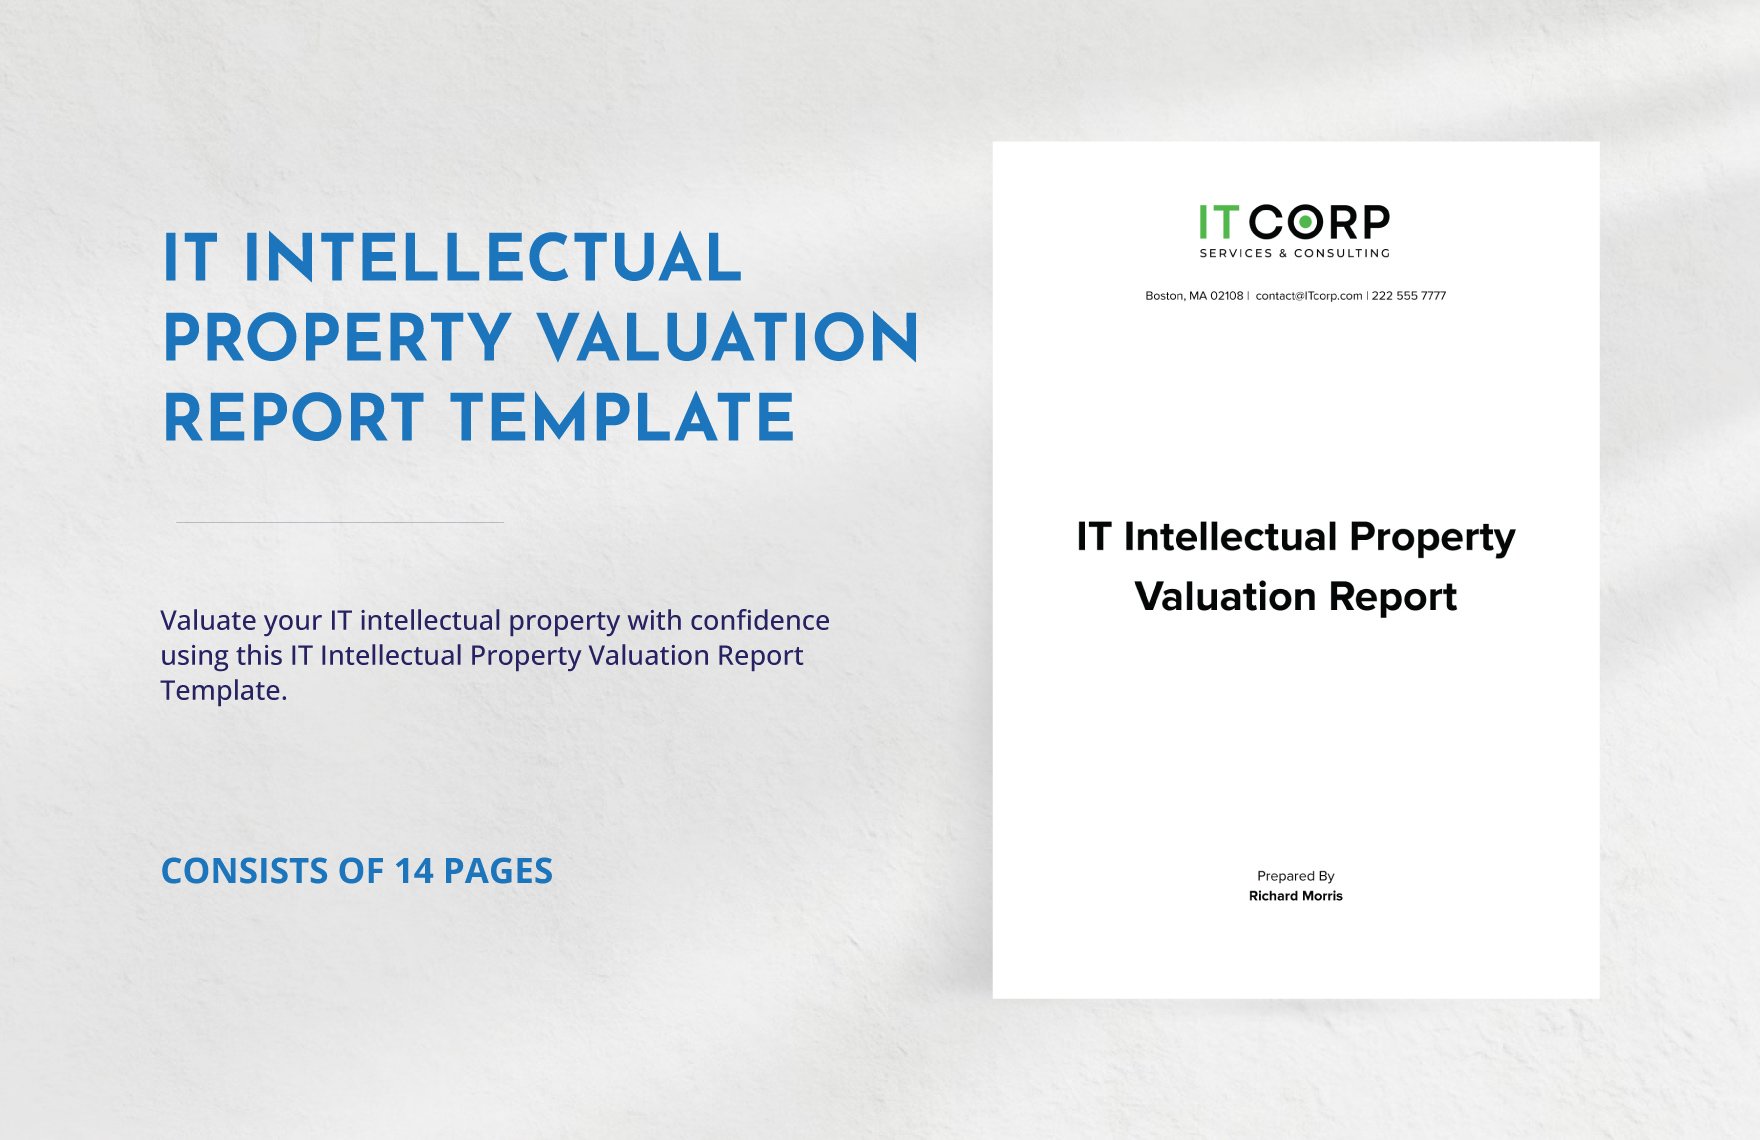 IT Intellectual Property Valuation Report Template in Word, Google Docs, PDF